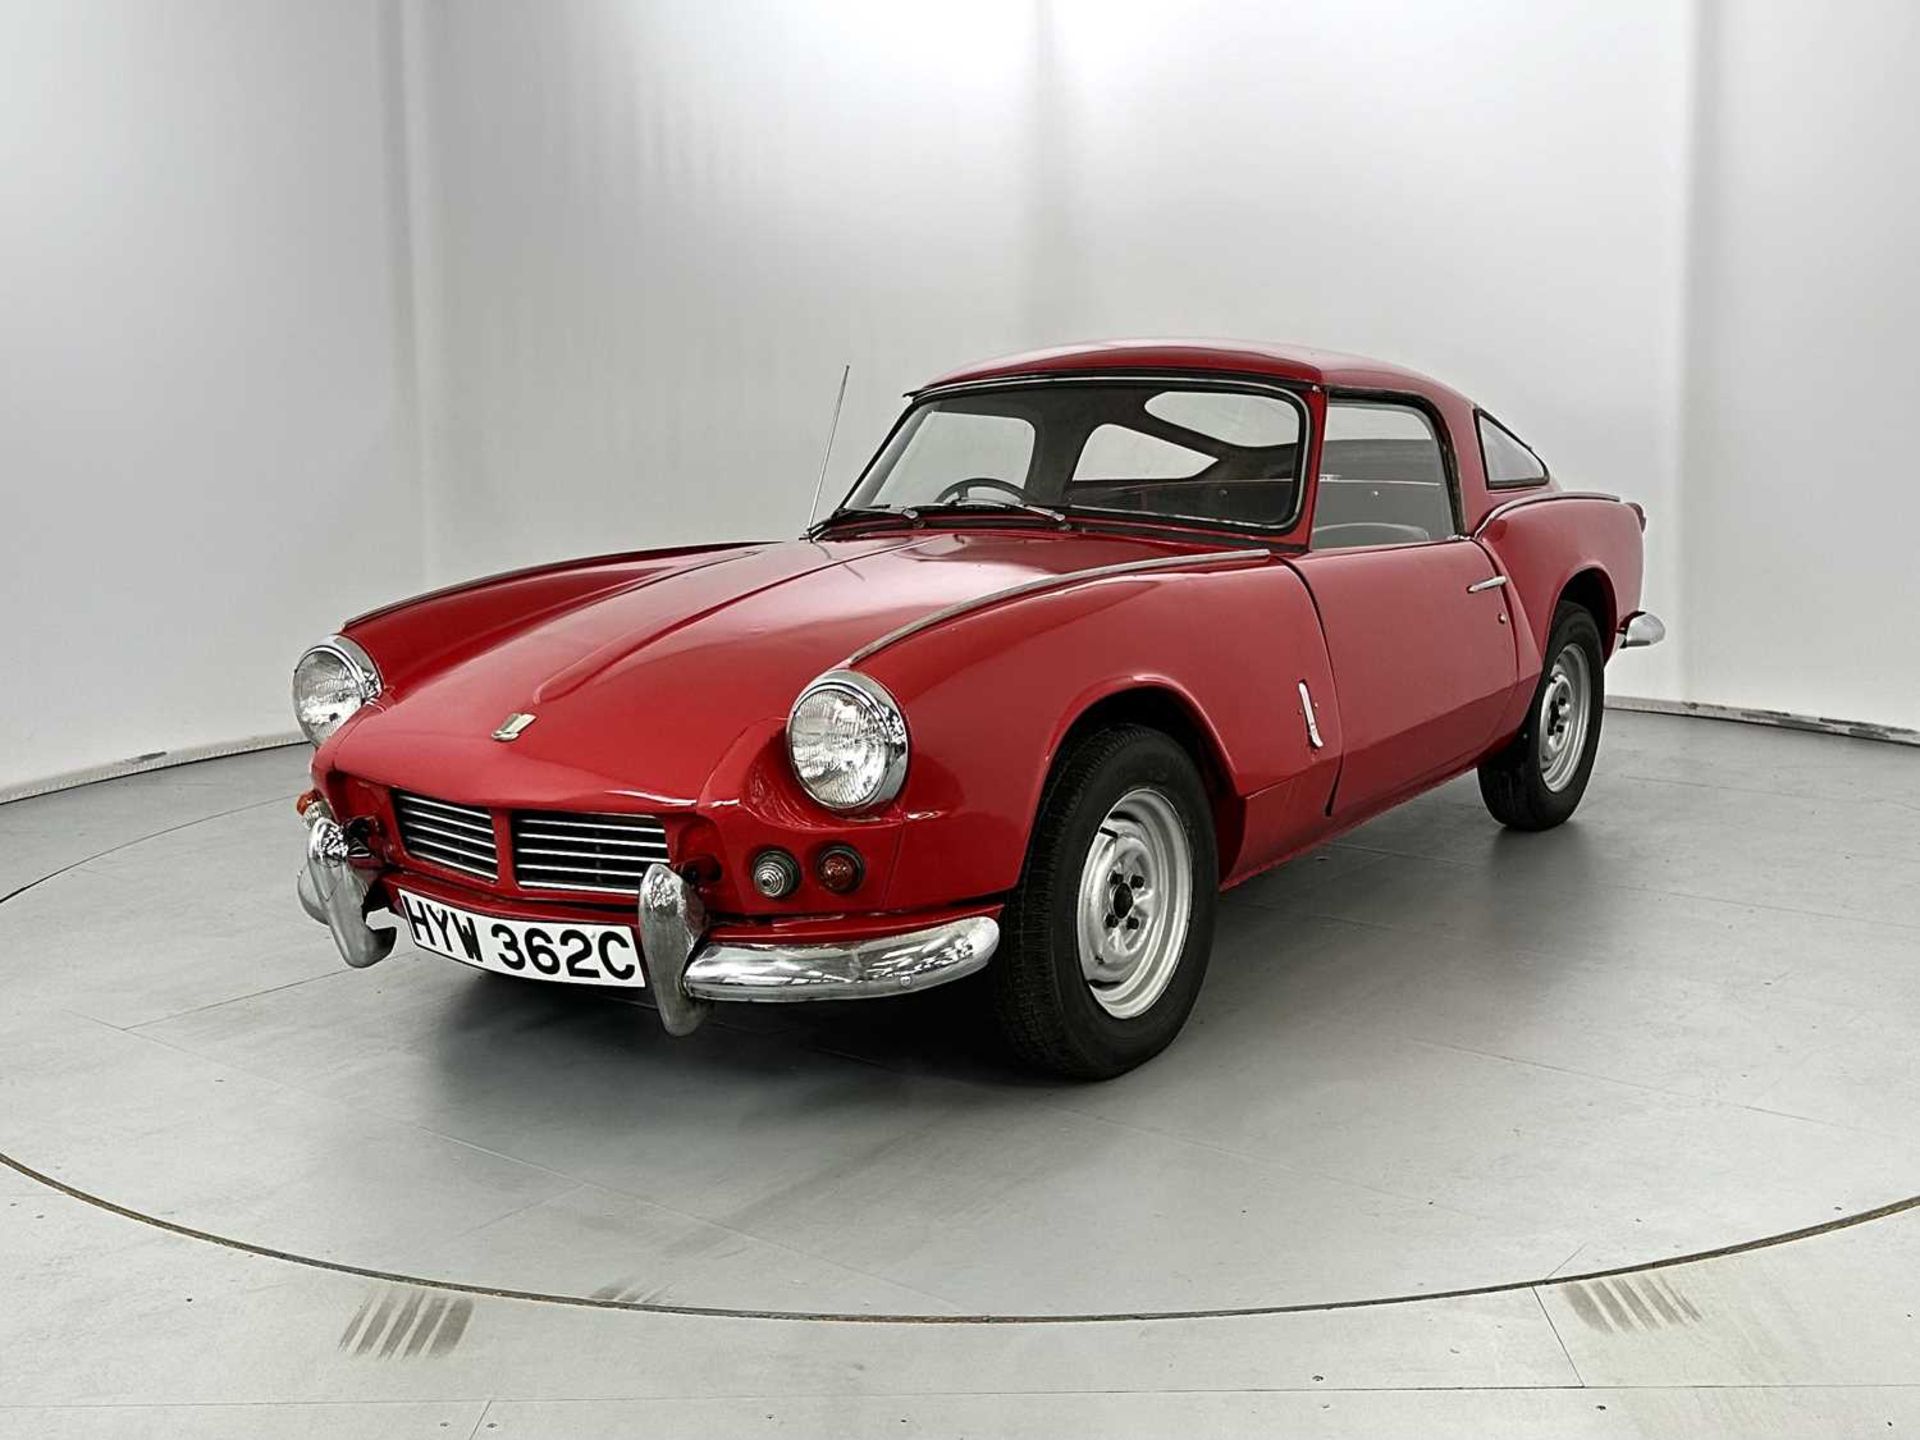 1965 Triumph  Spitfire MKII - Image 3 of 23